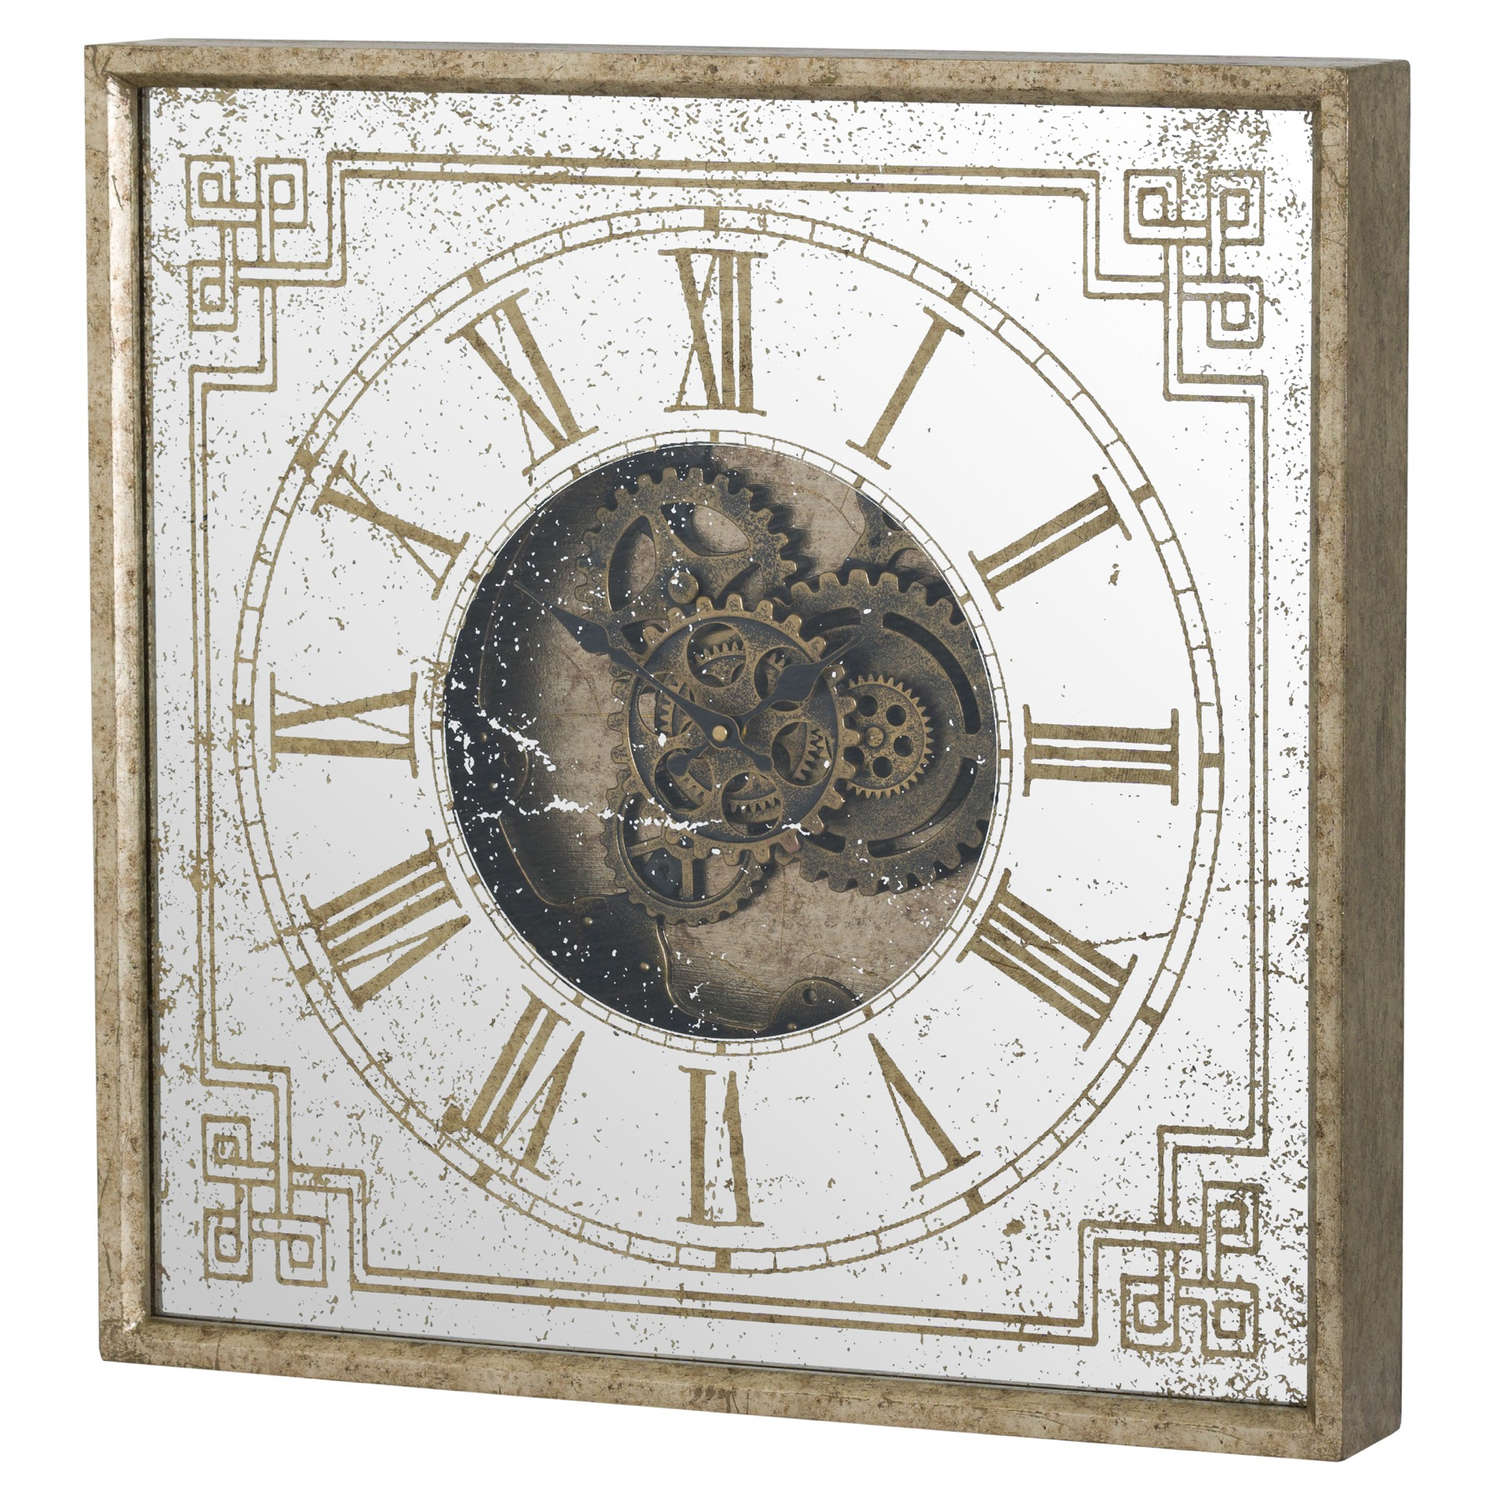 Mirrored Square Framed Clock with Moving Mechanism - Image 1